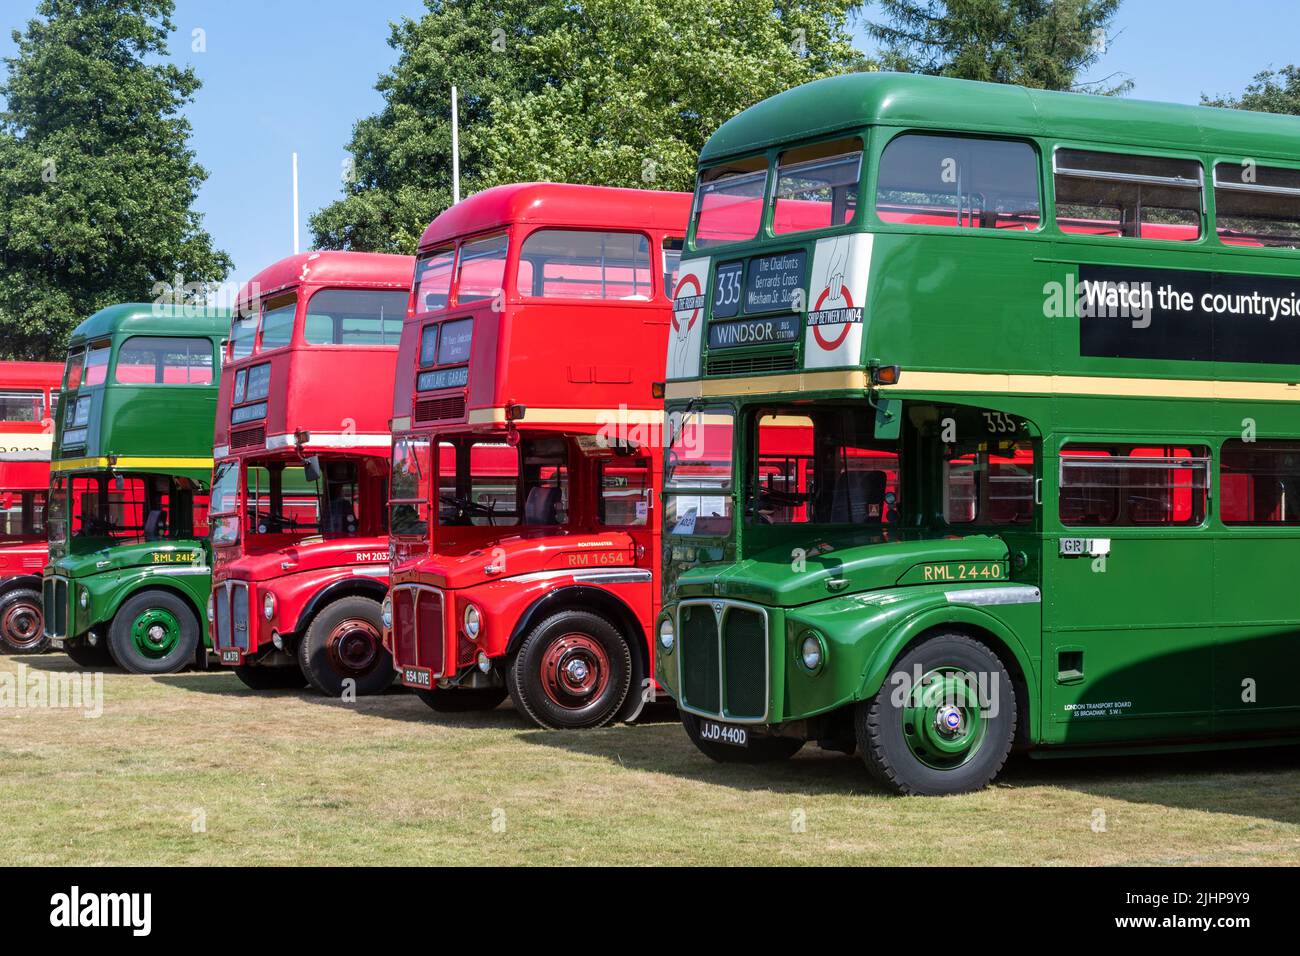 Alton Bus Rally and Running Day in July 2022, row of vintage buses at the summer transport event in Anstey Park, Alton, Hampshire, England, UK Stock Photo